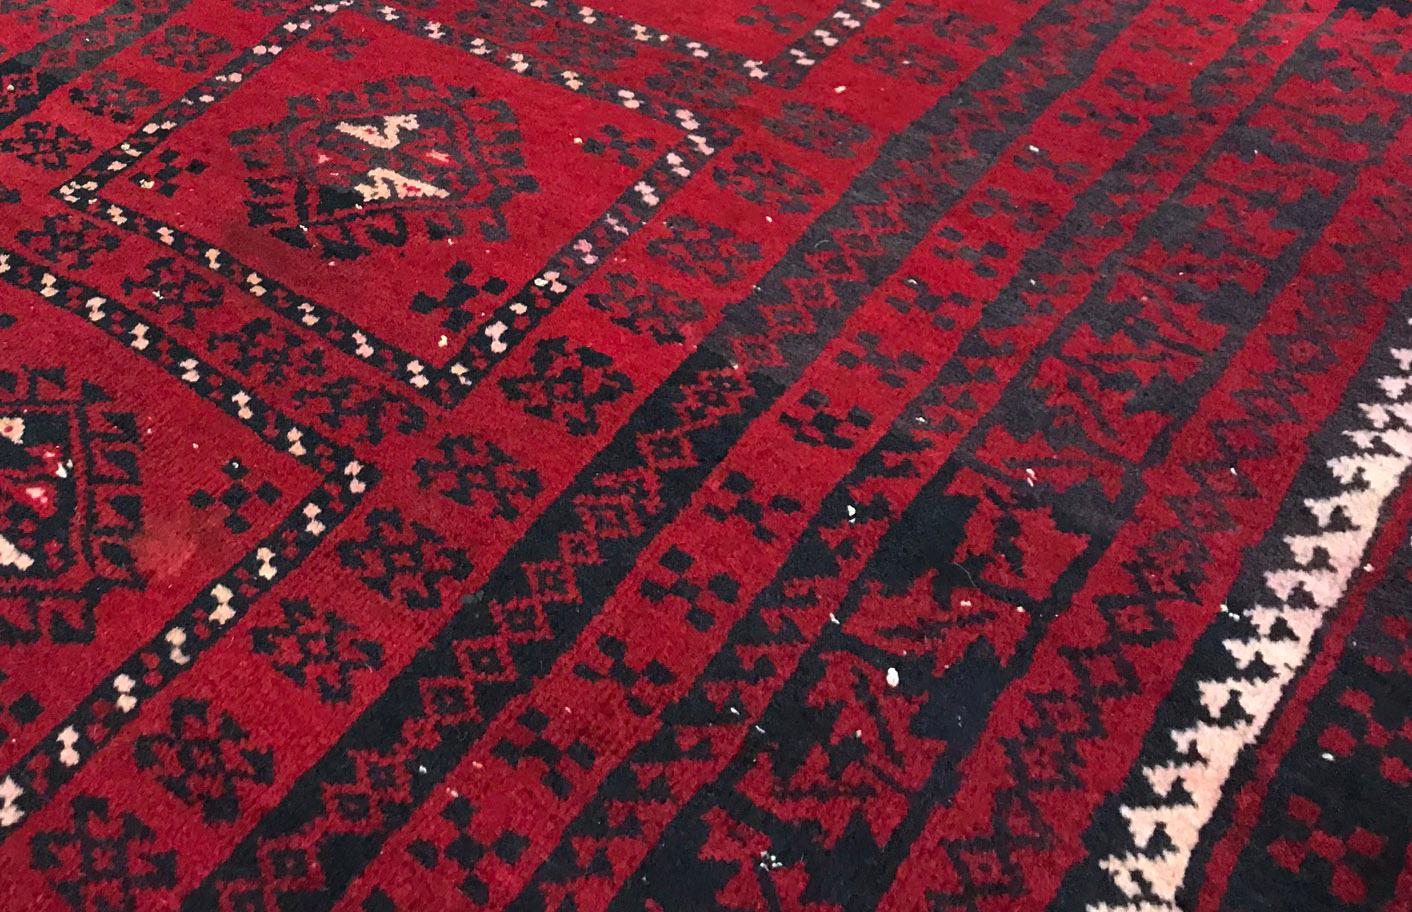 Afghan Balouch Traditional Handwoven Rug 3'1 x 7' In Excellent Condition For Sale In Secaucus, NJ